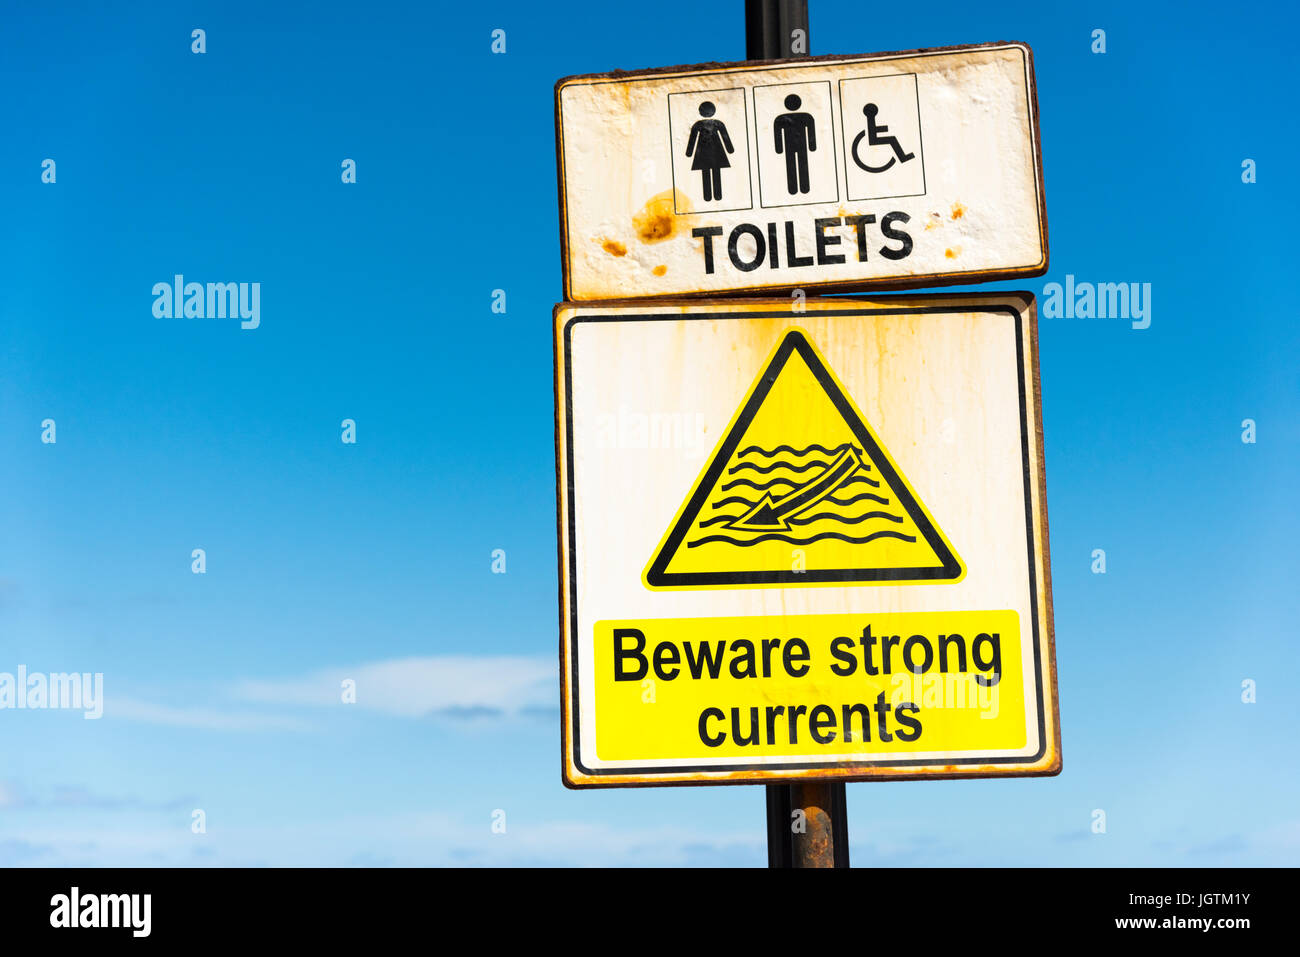 A sign warning of strong currents and dorections for toilets at St Julians Malta Stock Photo